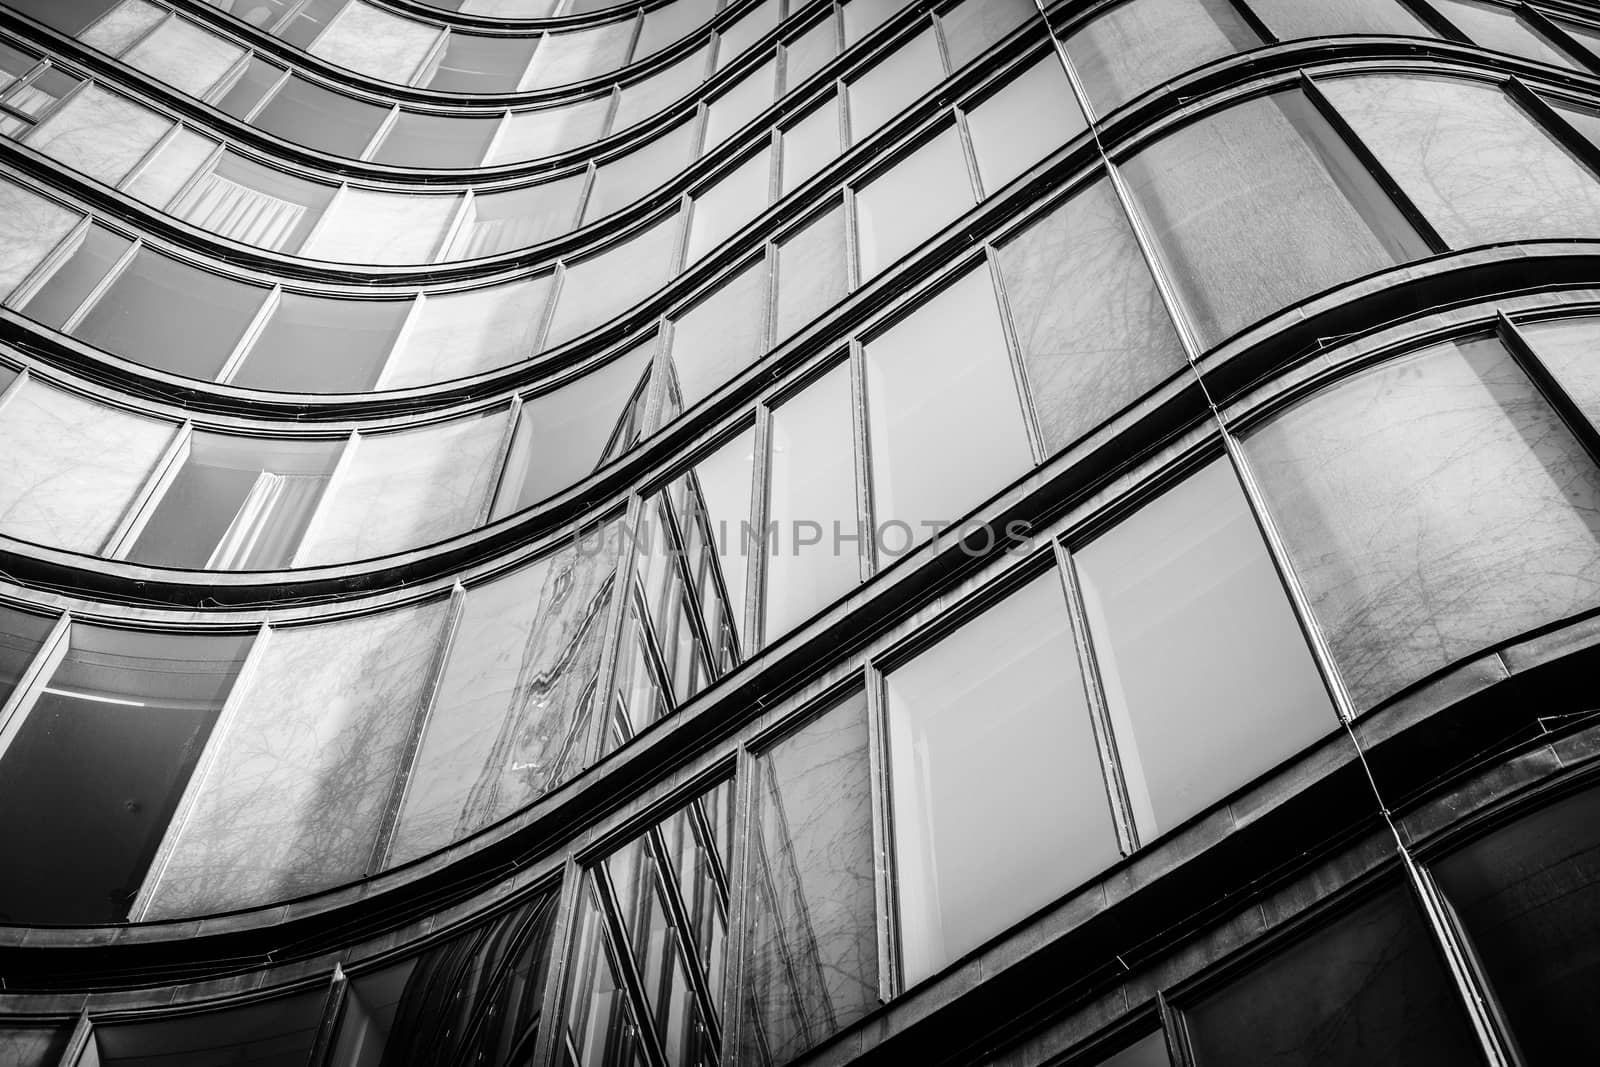 Curved building with shiny windows with reflections in black and white tone